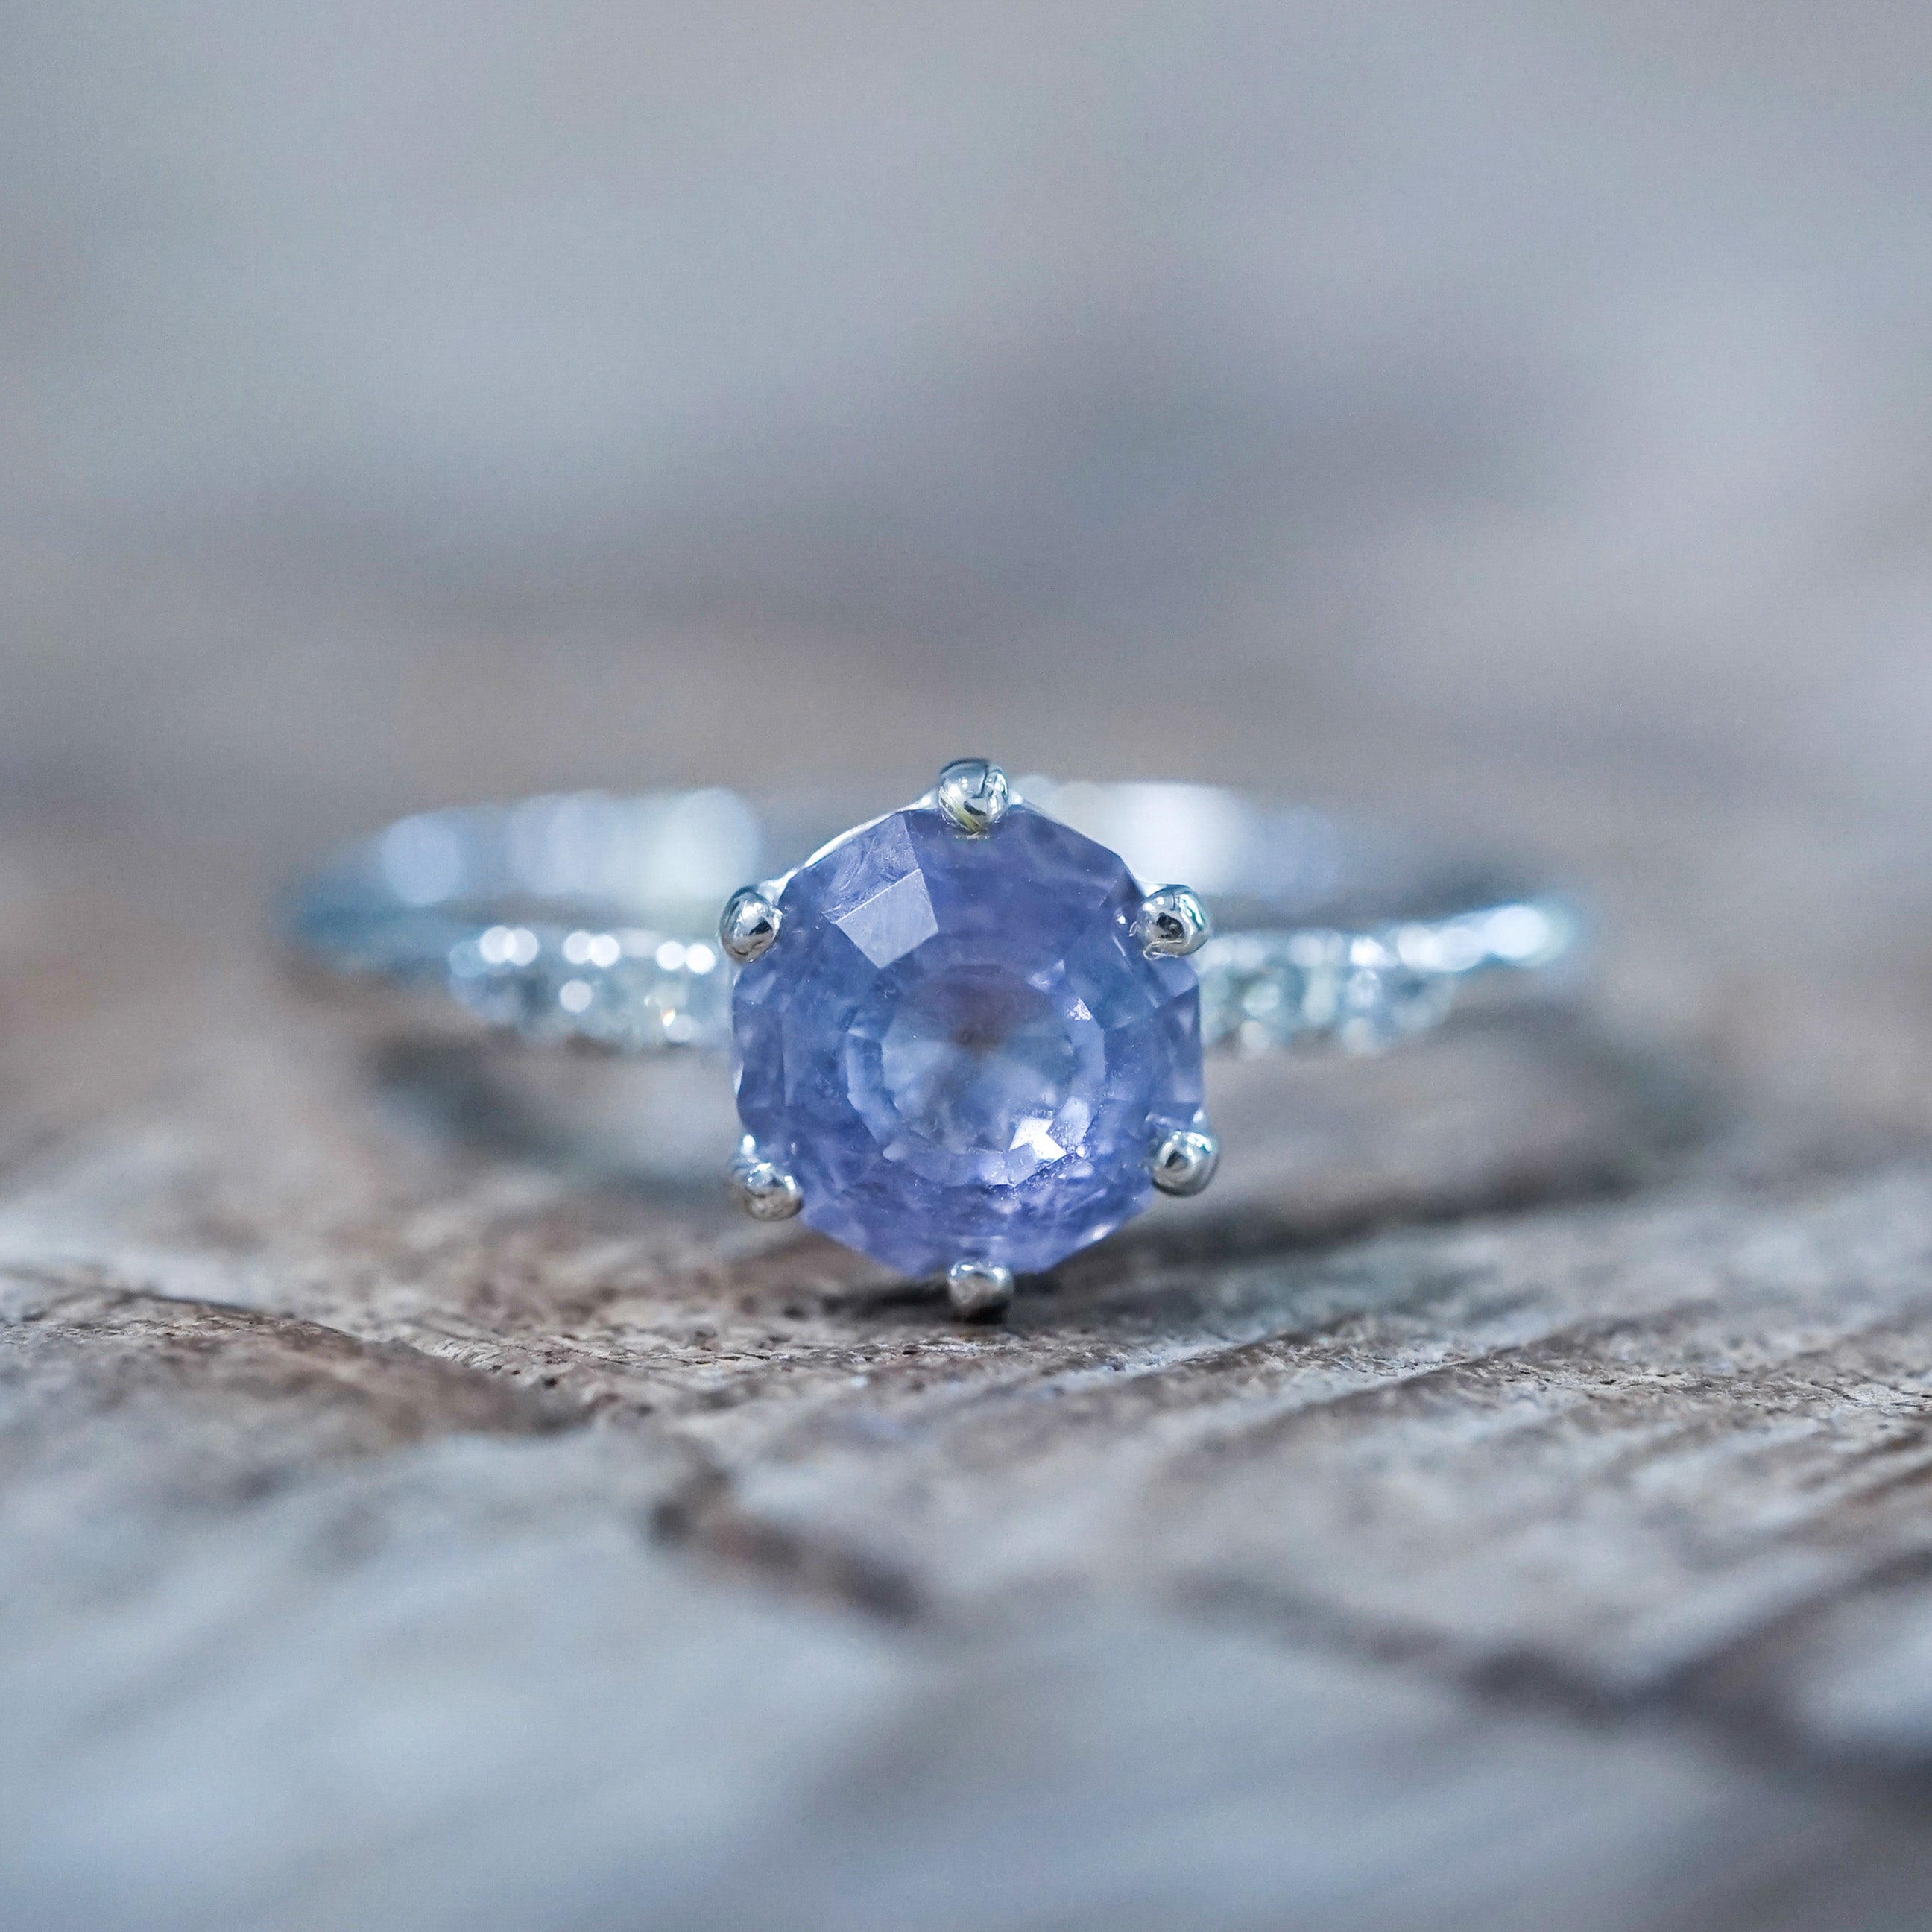 Chandelier Blue Sapphire Ring - Engagement Ring